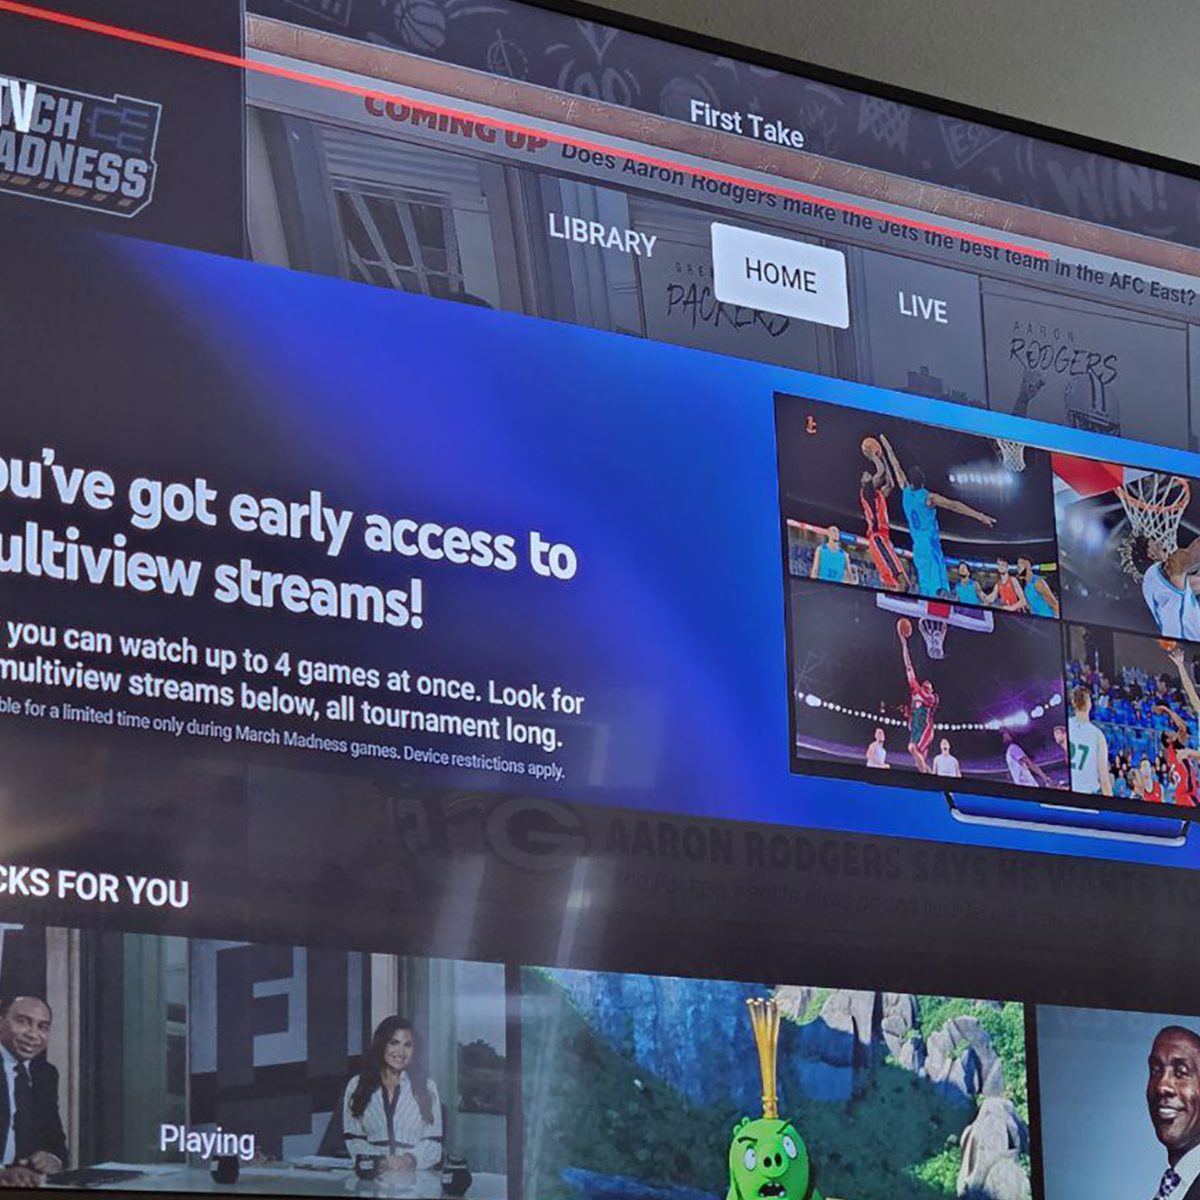 You Can Ask YouTube TV Support for Multiview Access